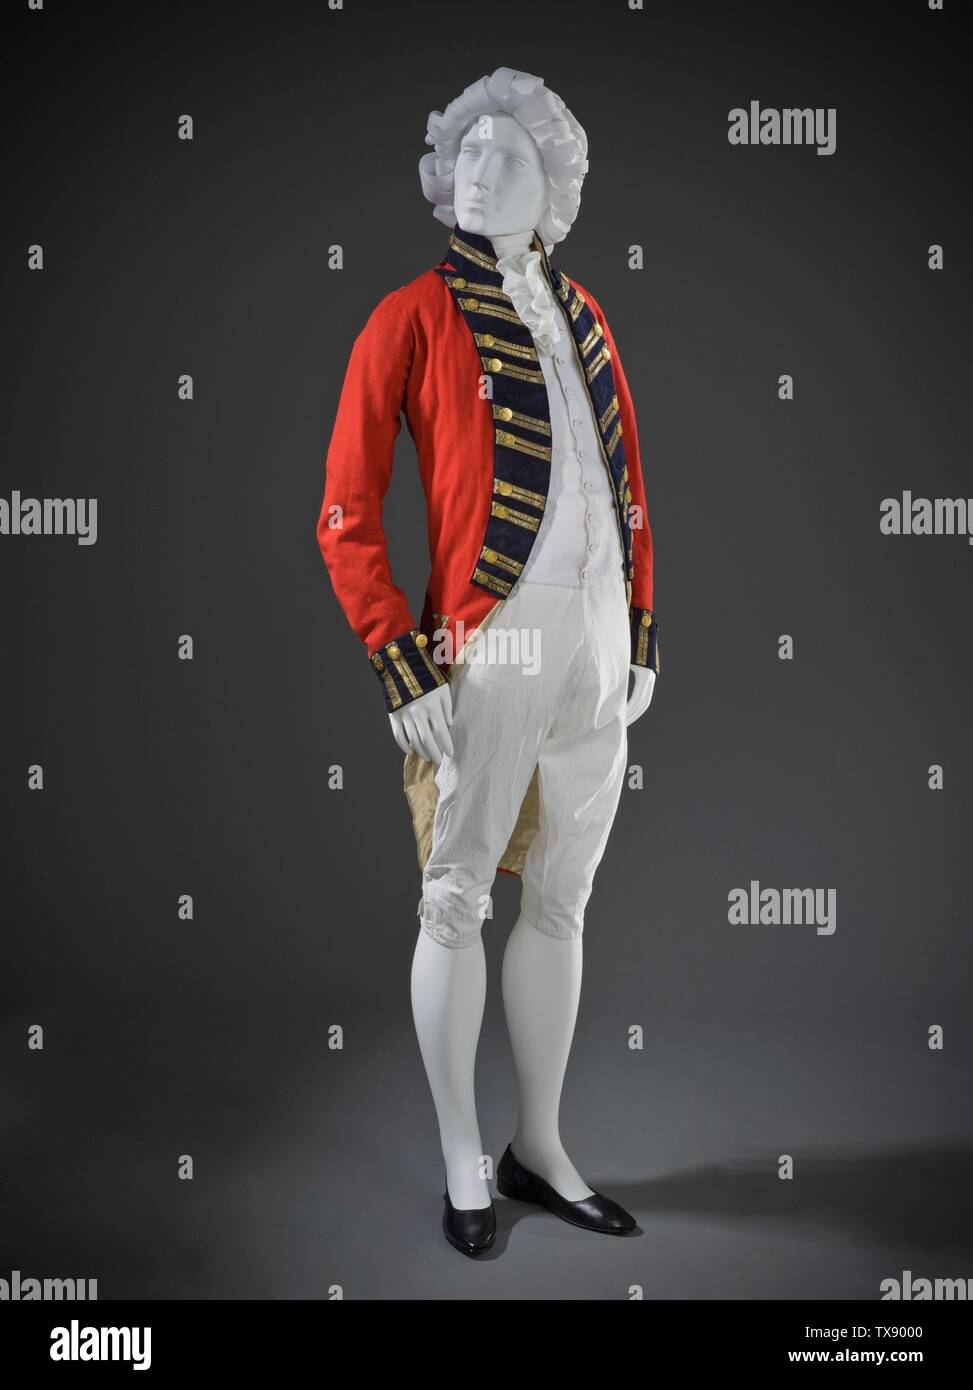 Manâ€™s Military Uniform Vest;  England, 1799-1800 Costumes; principal attire (upper body) Cotton piquÃ© and linen plain weave Purchased with funds provided by Michael and Ellen Michelson (M.2010.33.14.2) Costume and Textiles; between 1799 and 1800 date QS:P571,+1500-00-00T00:00:00Z/6,P1319,+1799-00-00T00:00:00Z/9,P1326,+1800-00-00T00:00:00Z/9; Stock Photo